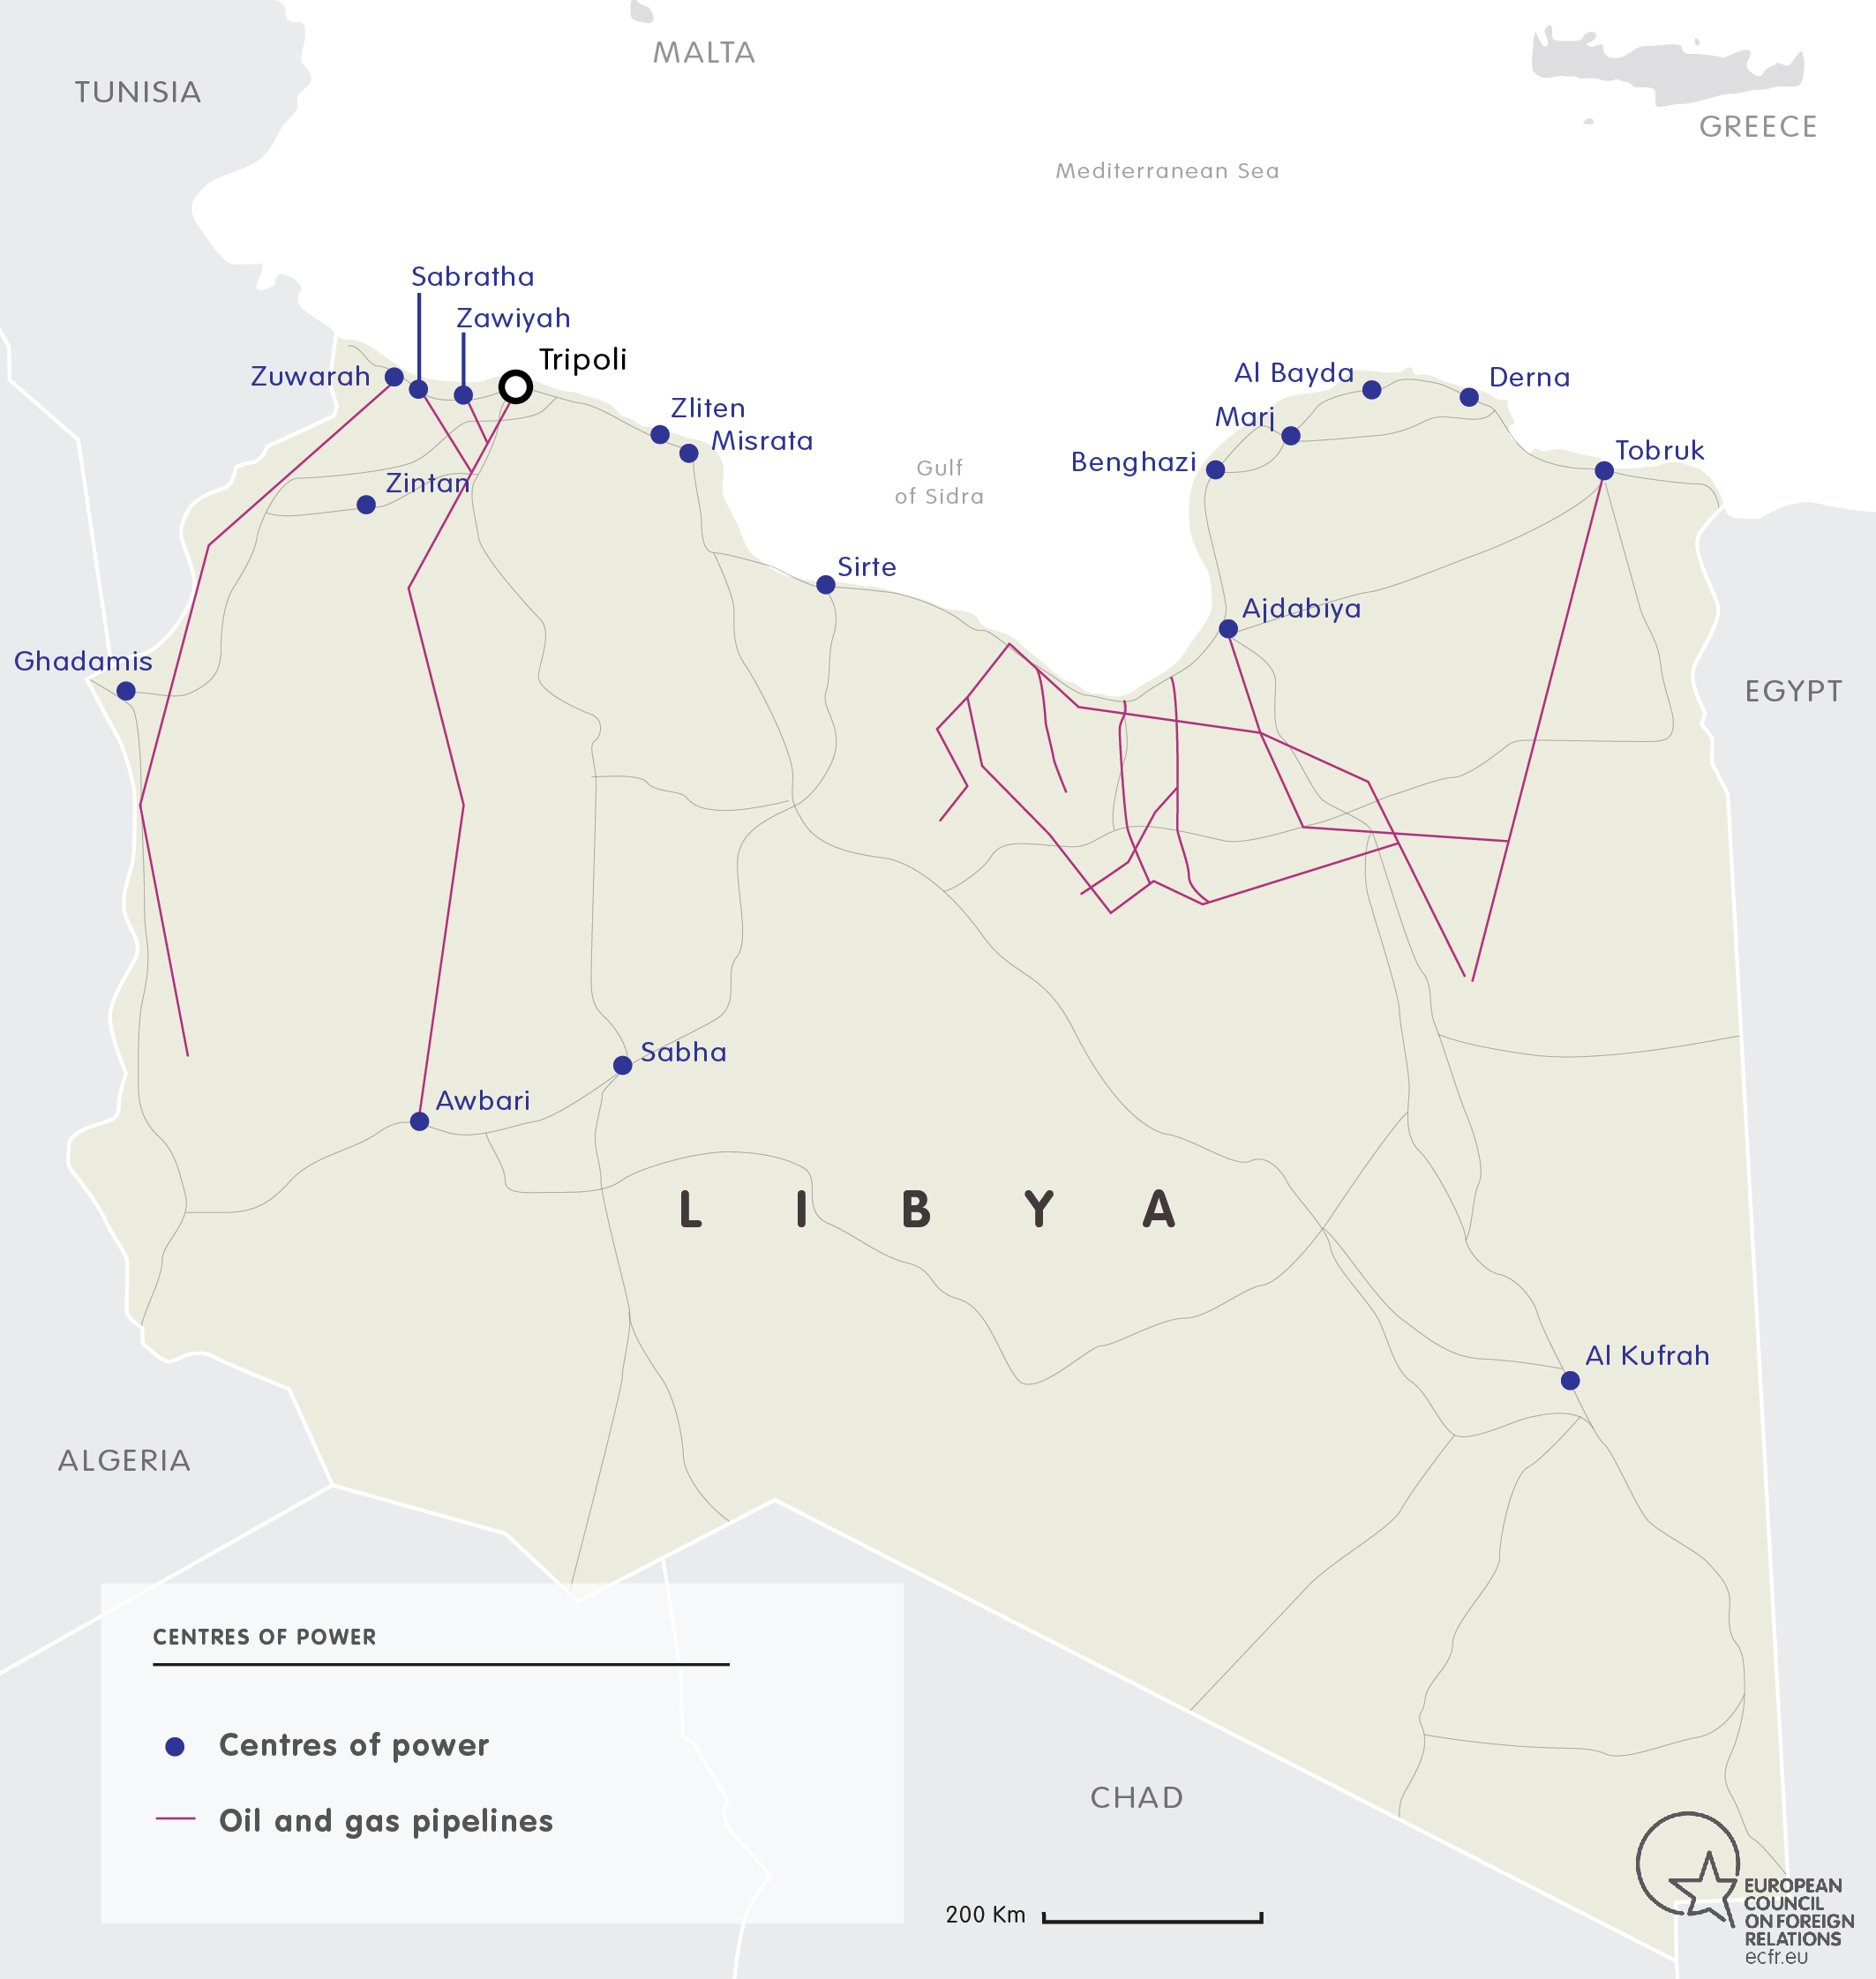 Centres of power in Libya - Italian role